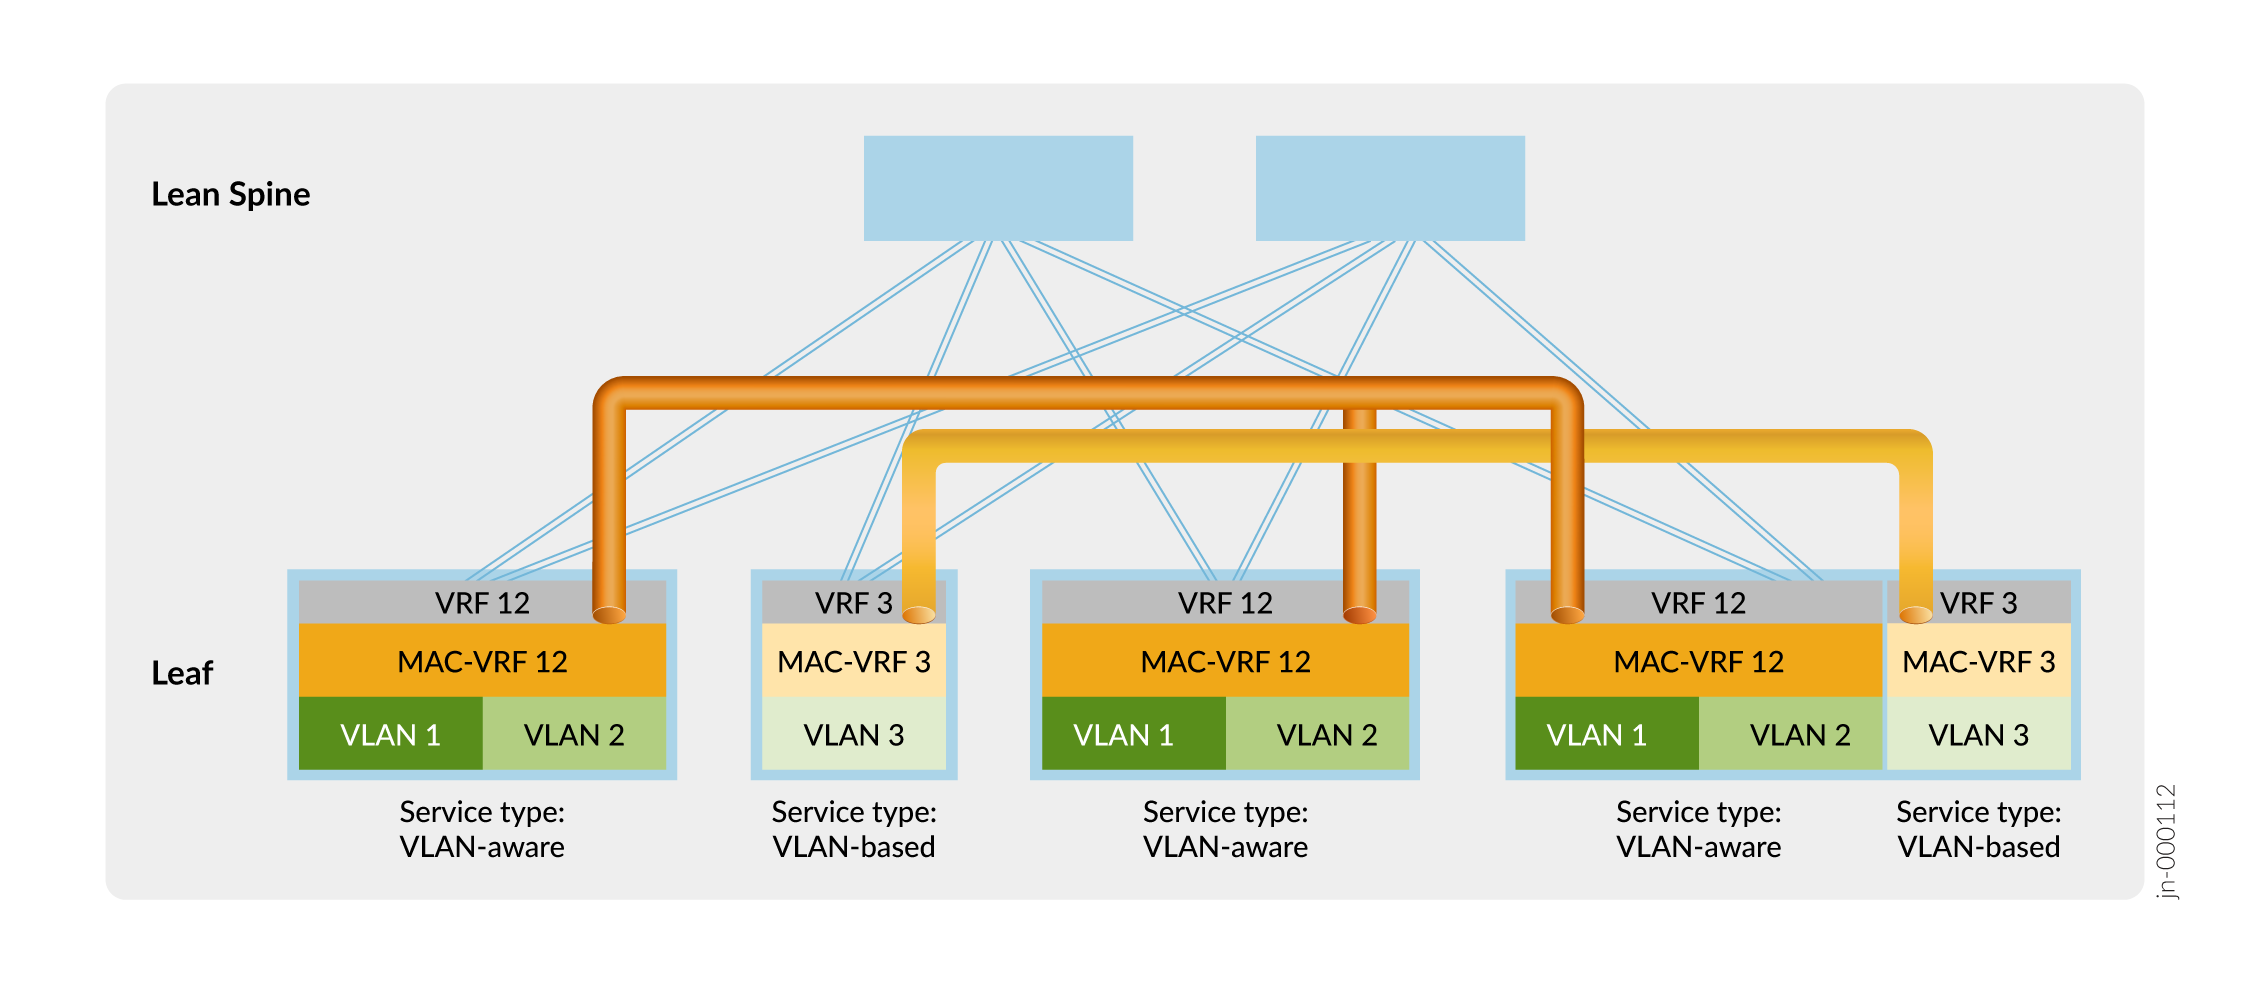 Edge-Routed Bridging
Overlay Fabric with MAC-VRF Instances for Tenant Separation